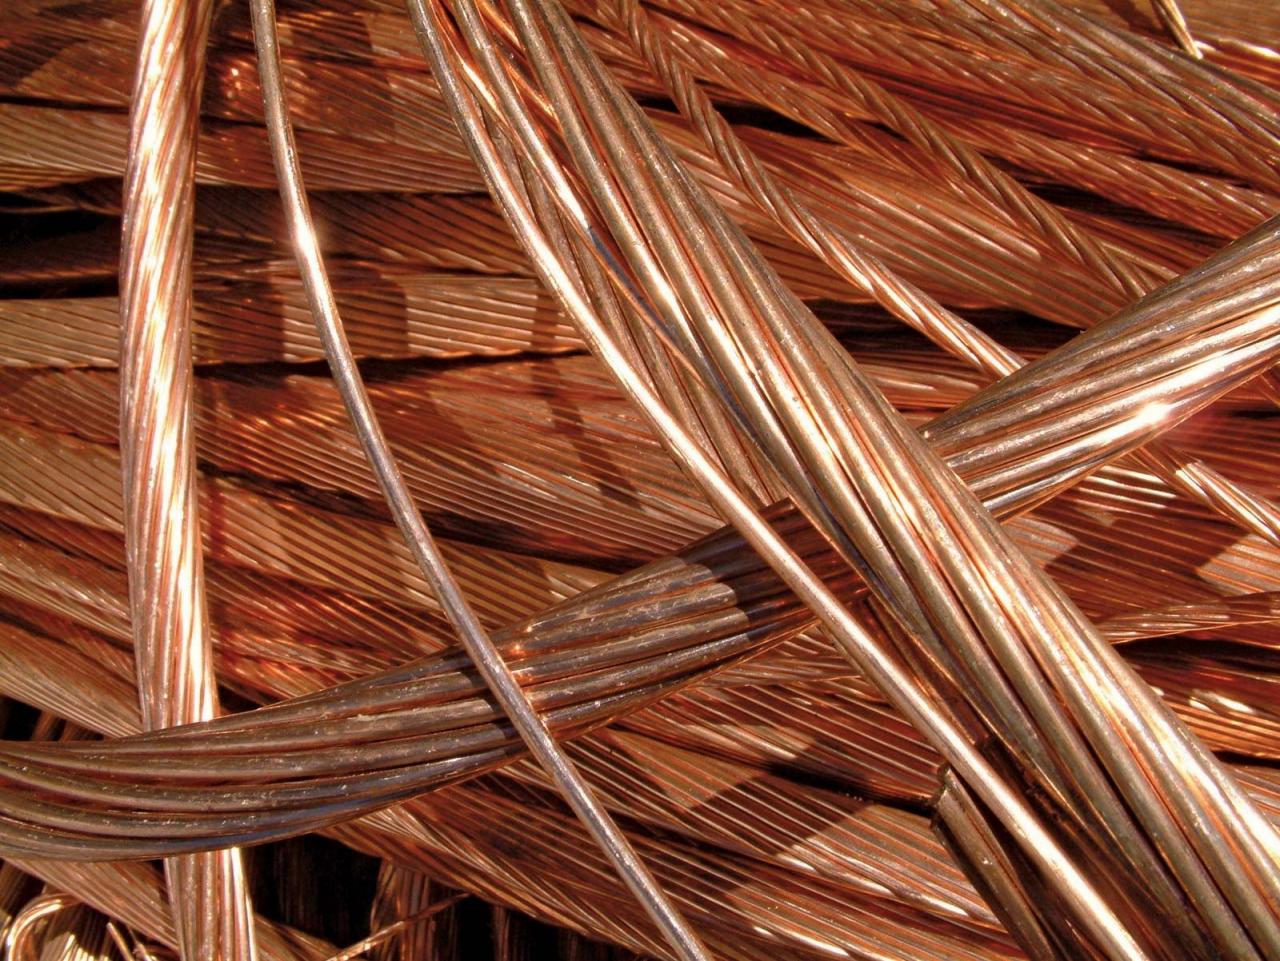 Copper | Uses, Properties, & Facts | Britannica